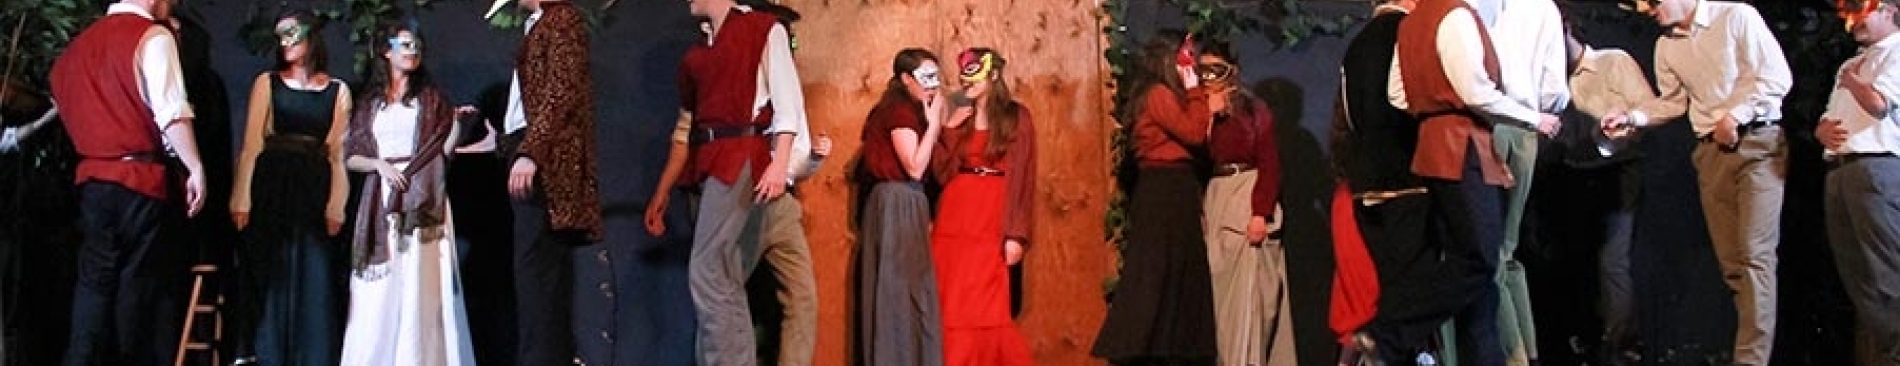 Slideshow: Shakespeare’s Much Ado About Nothing